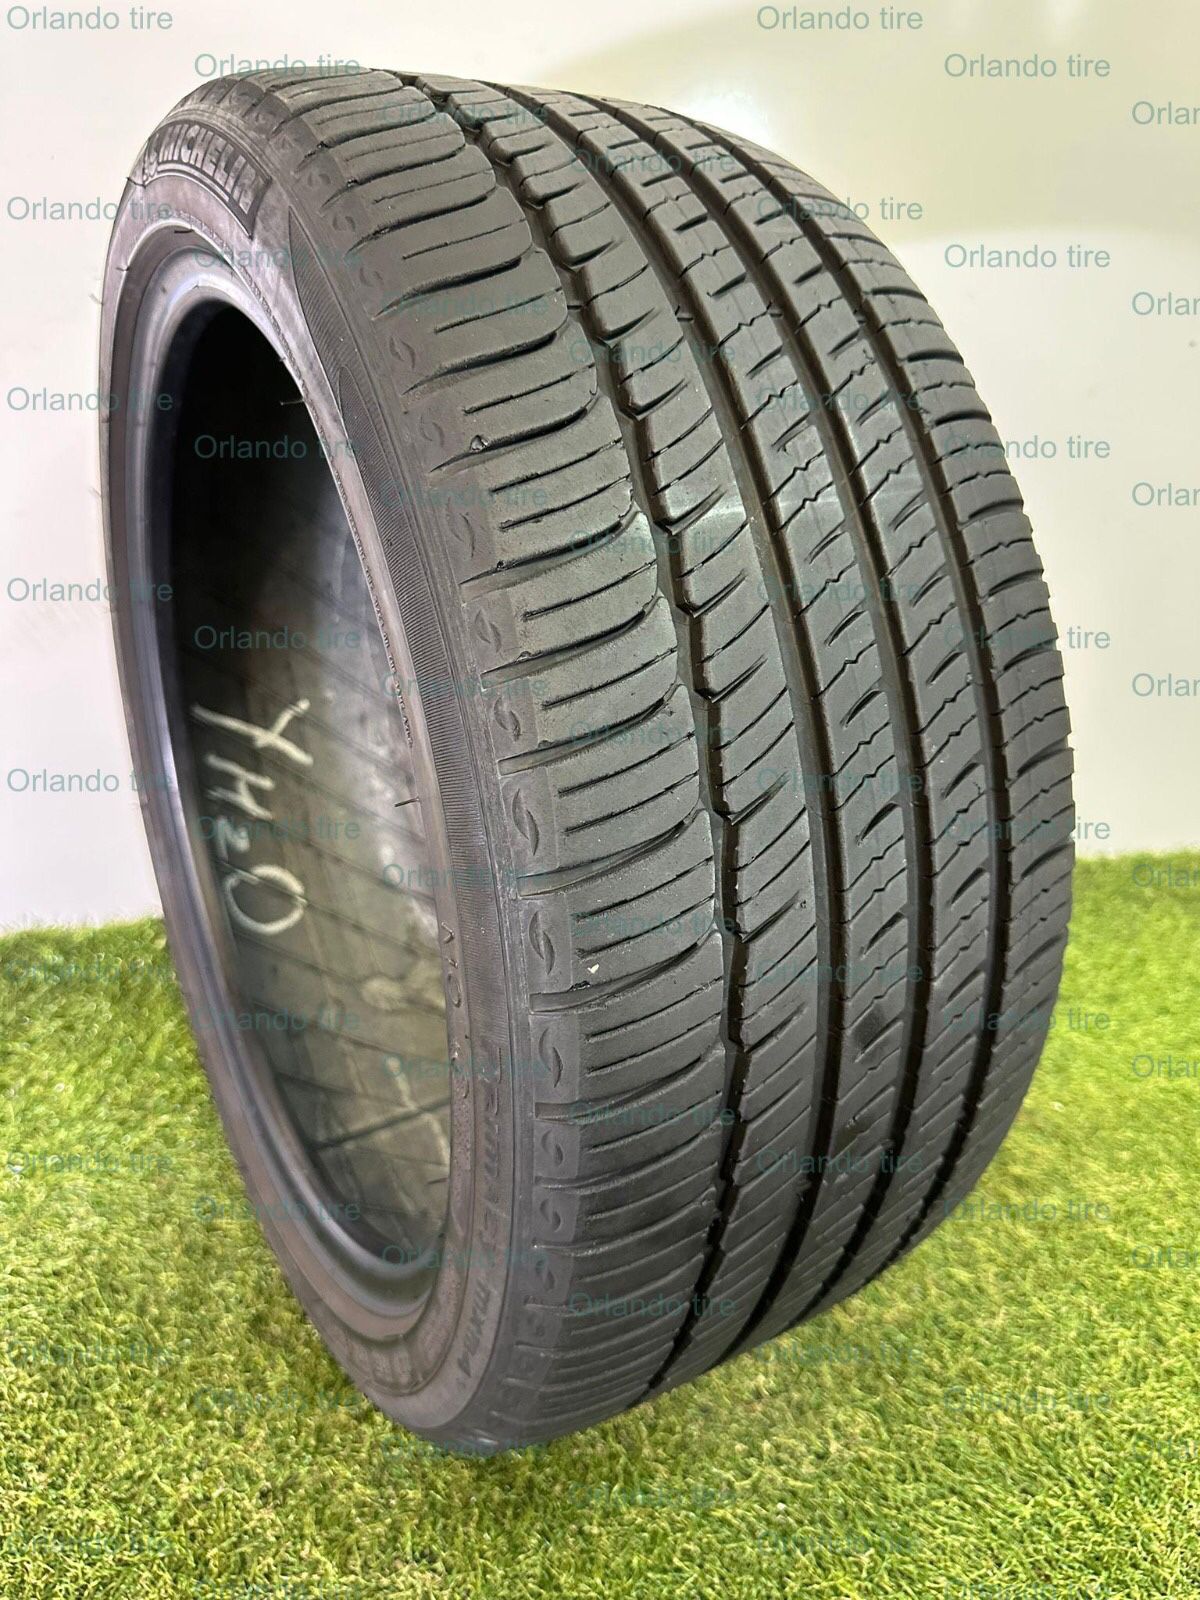 S627  235 40 18 91H  Michelin Primacy Mxm4  One Used Tire 85% Life 